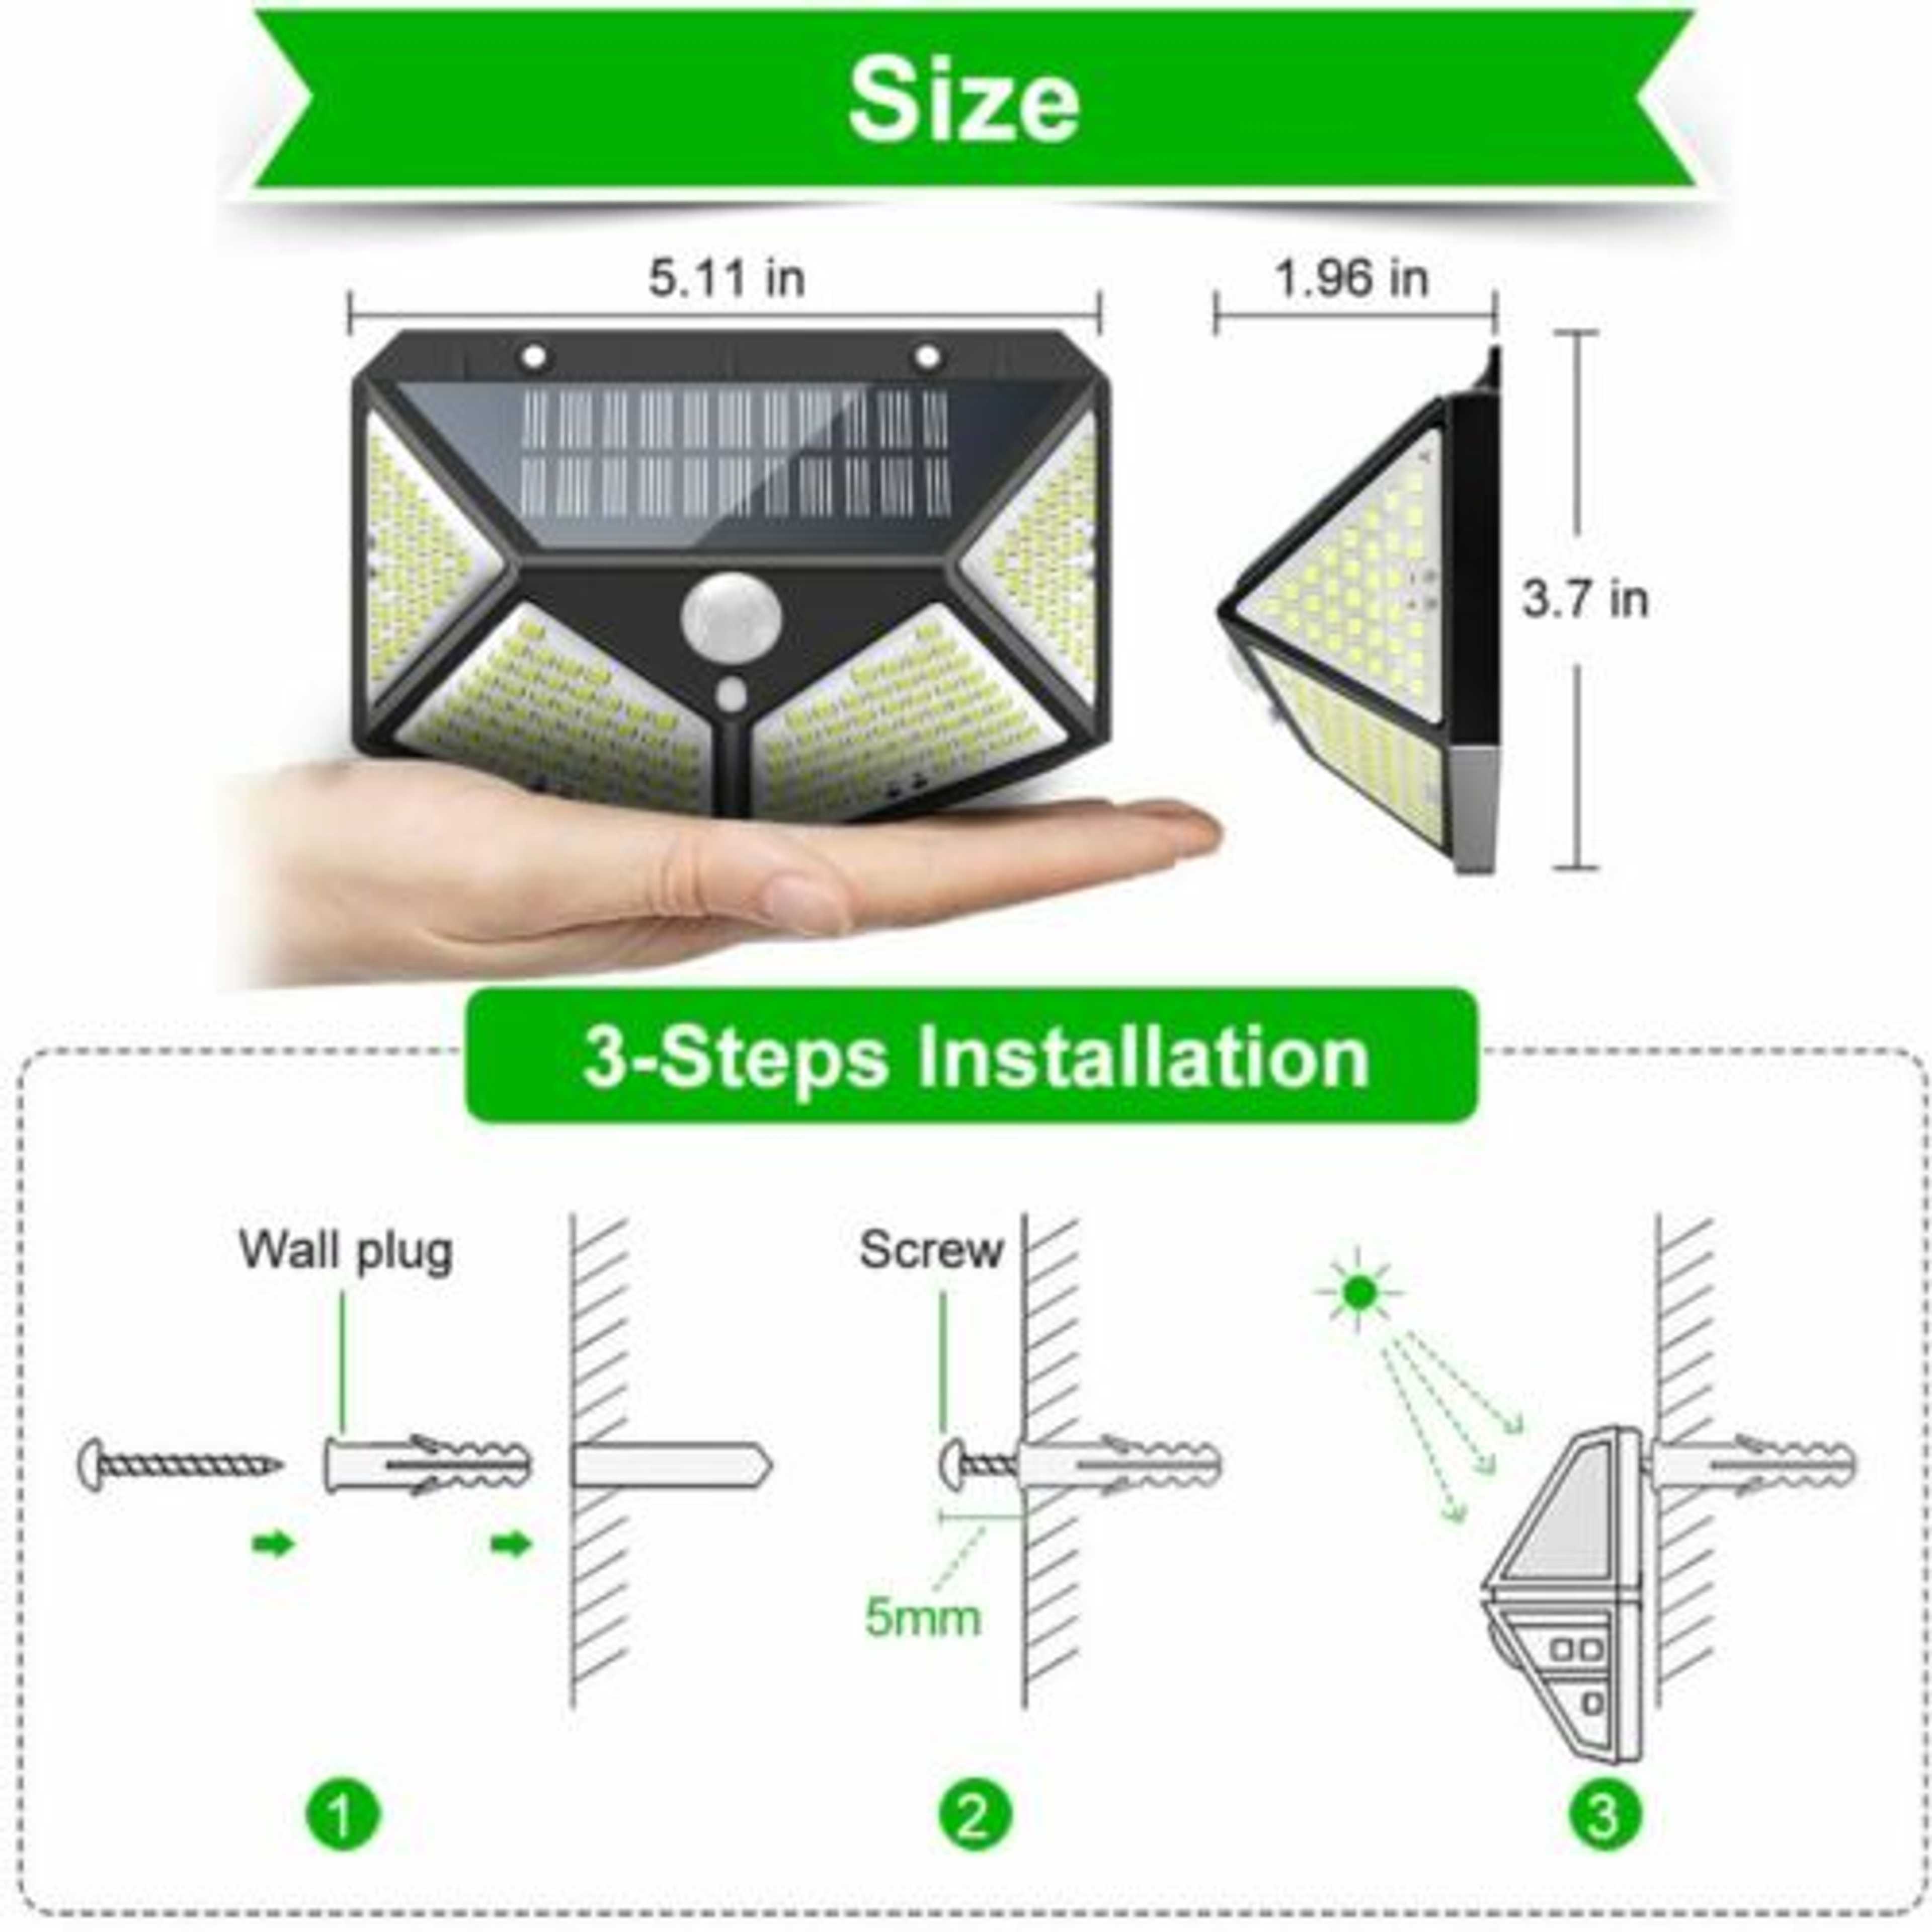 Solar Lights Outdoor, Big size 114 LED Solar Motion Sensor Security Light, 2400mAh 270 Degree Lighting Angle with 3 Modes IP65 Waterproof Solar Powered Wireless Wall solar Light for Garden Patio Fence Garage Pathway